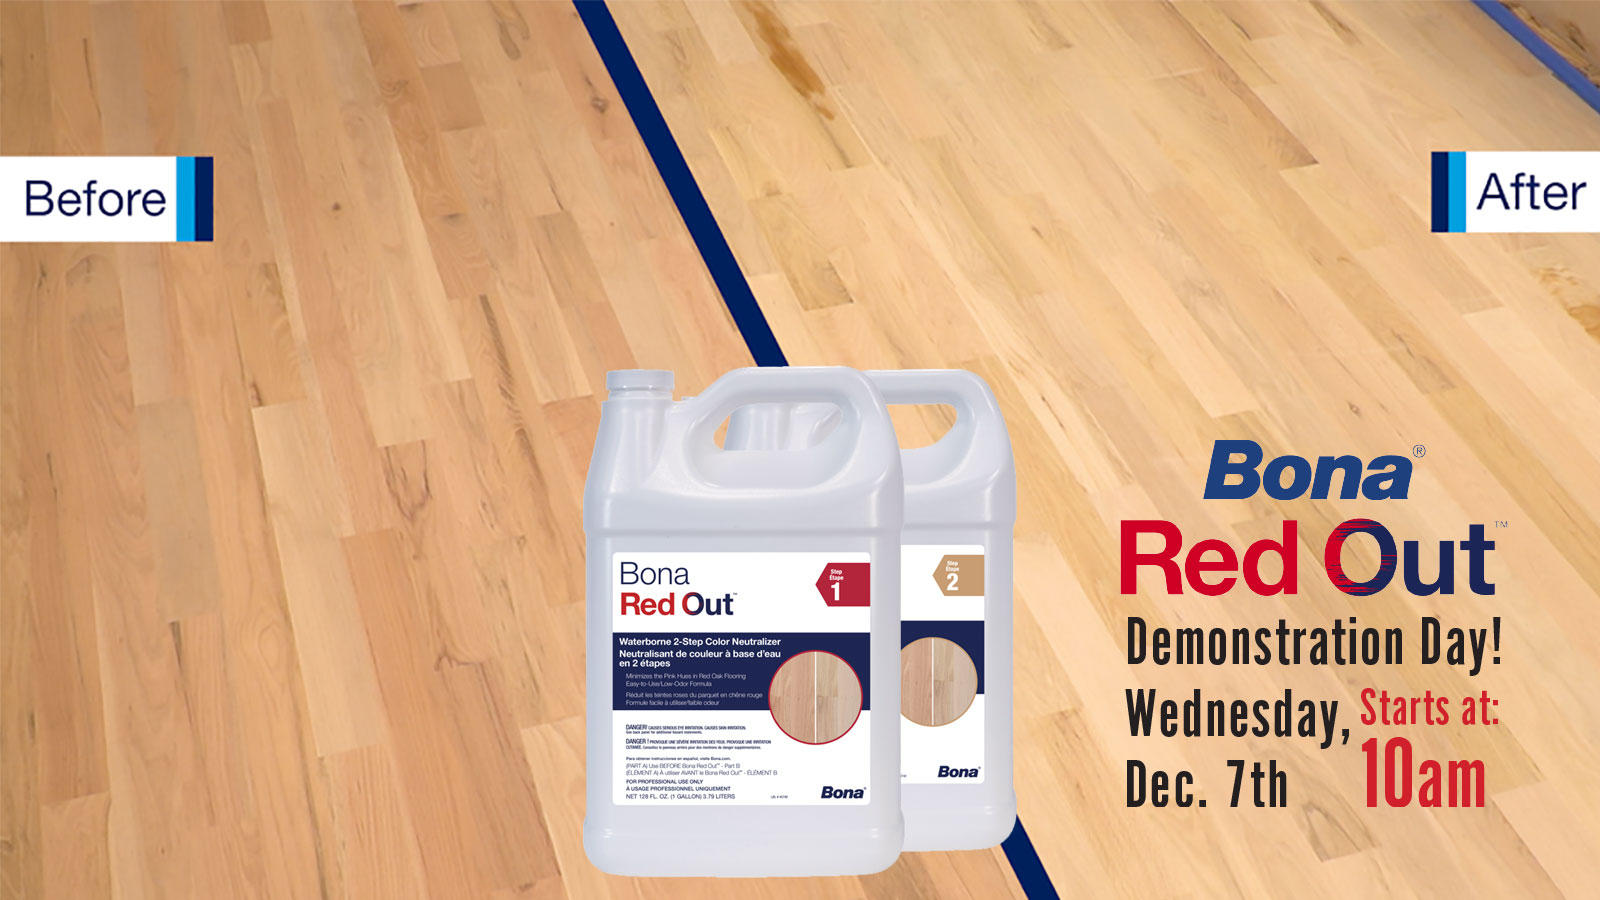 Bona Red Out Demo Day! 12-7-22, at 10:00 am.